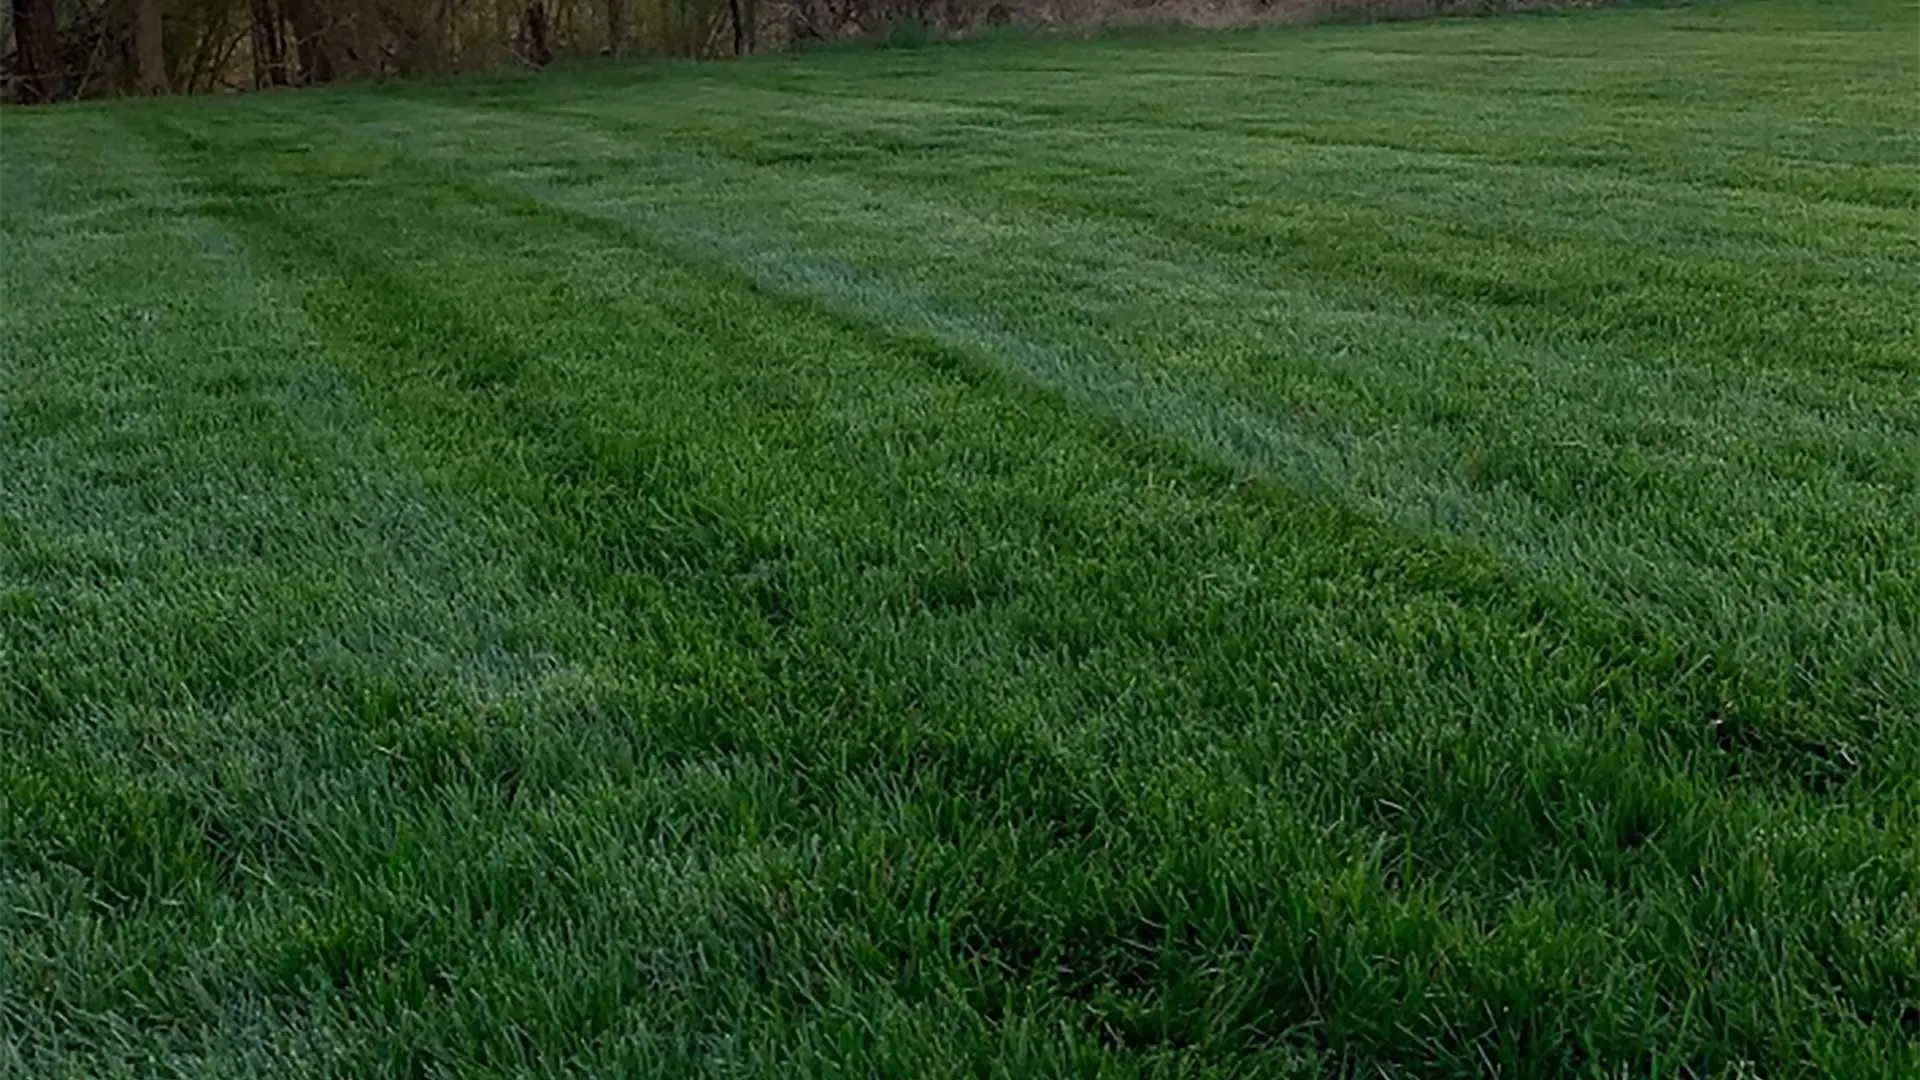 Our 9-step premium lawn care program helped this Haymarket client's lawn grow green and strong.